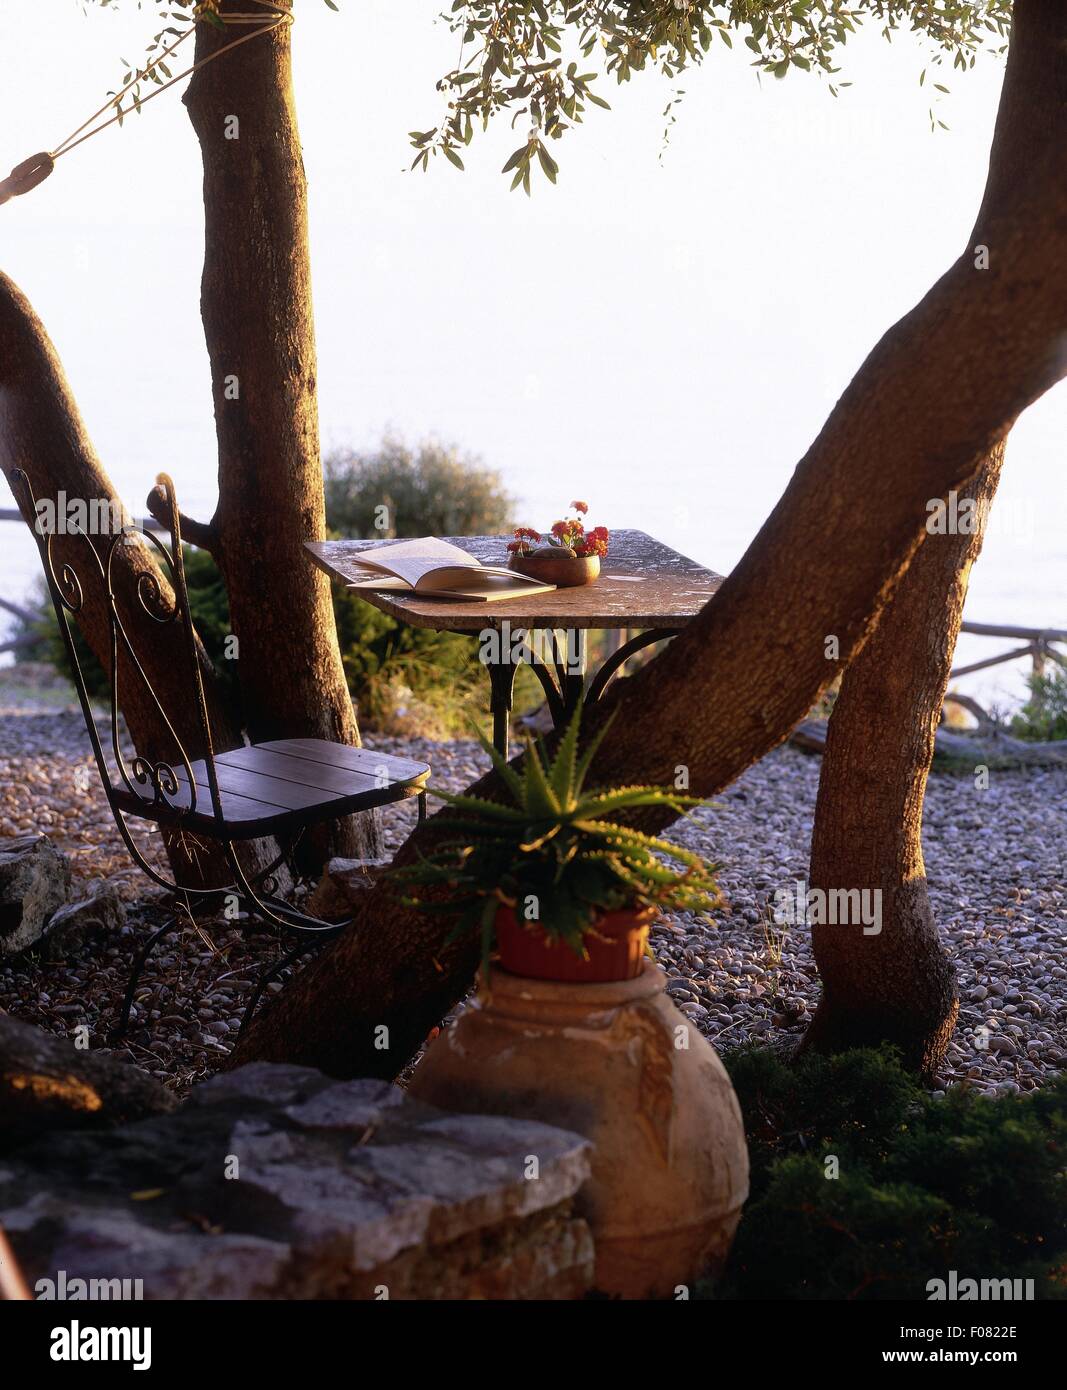 Laid table and chair under tree overlooking sea in evening Stock Photo